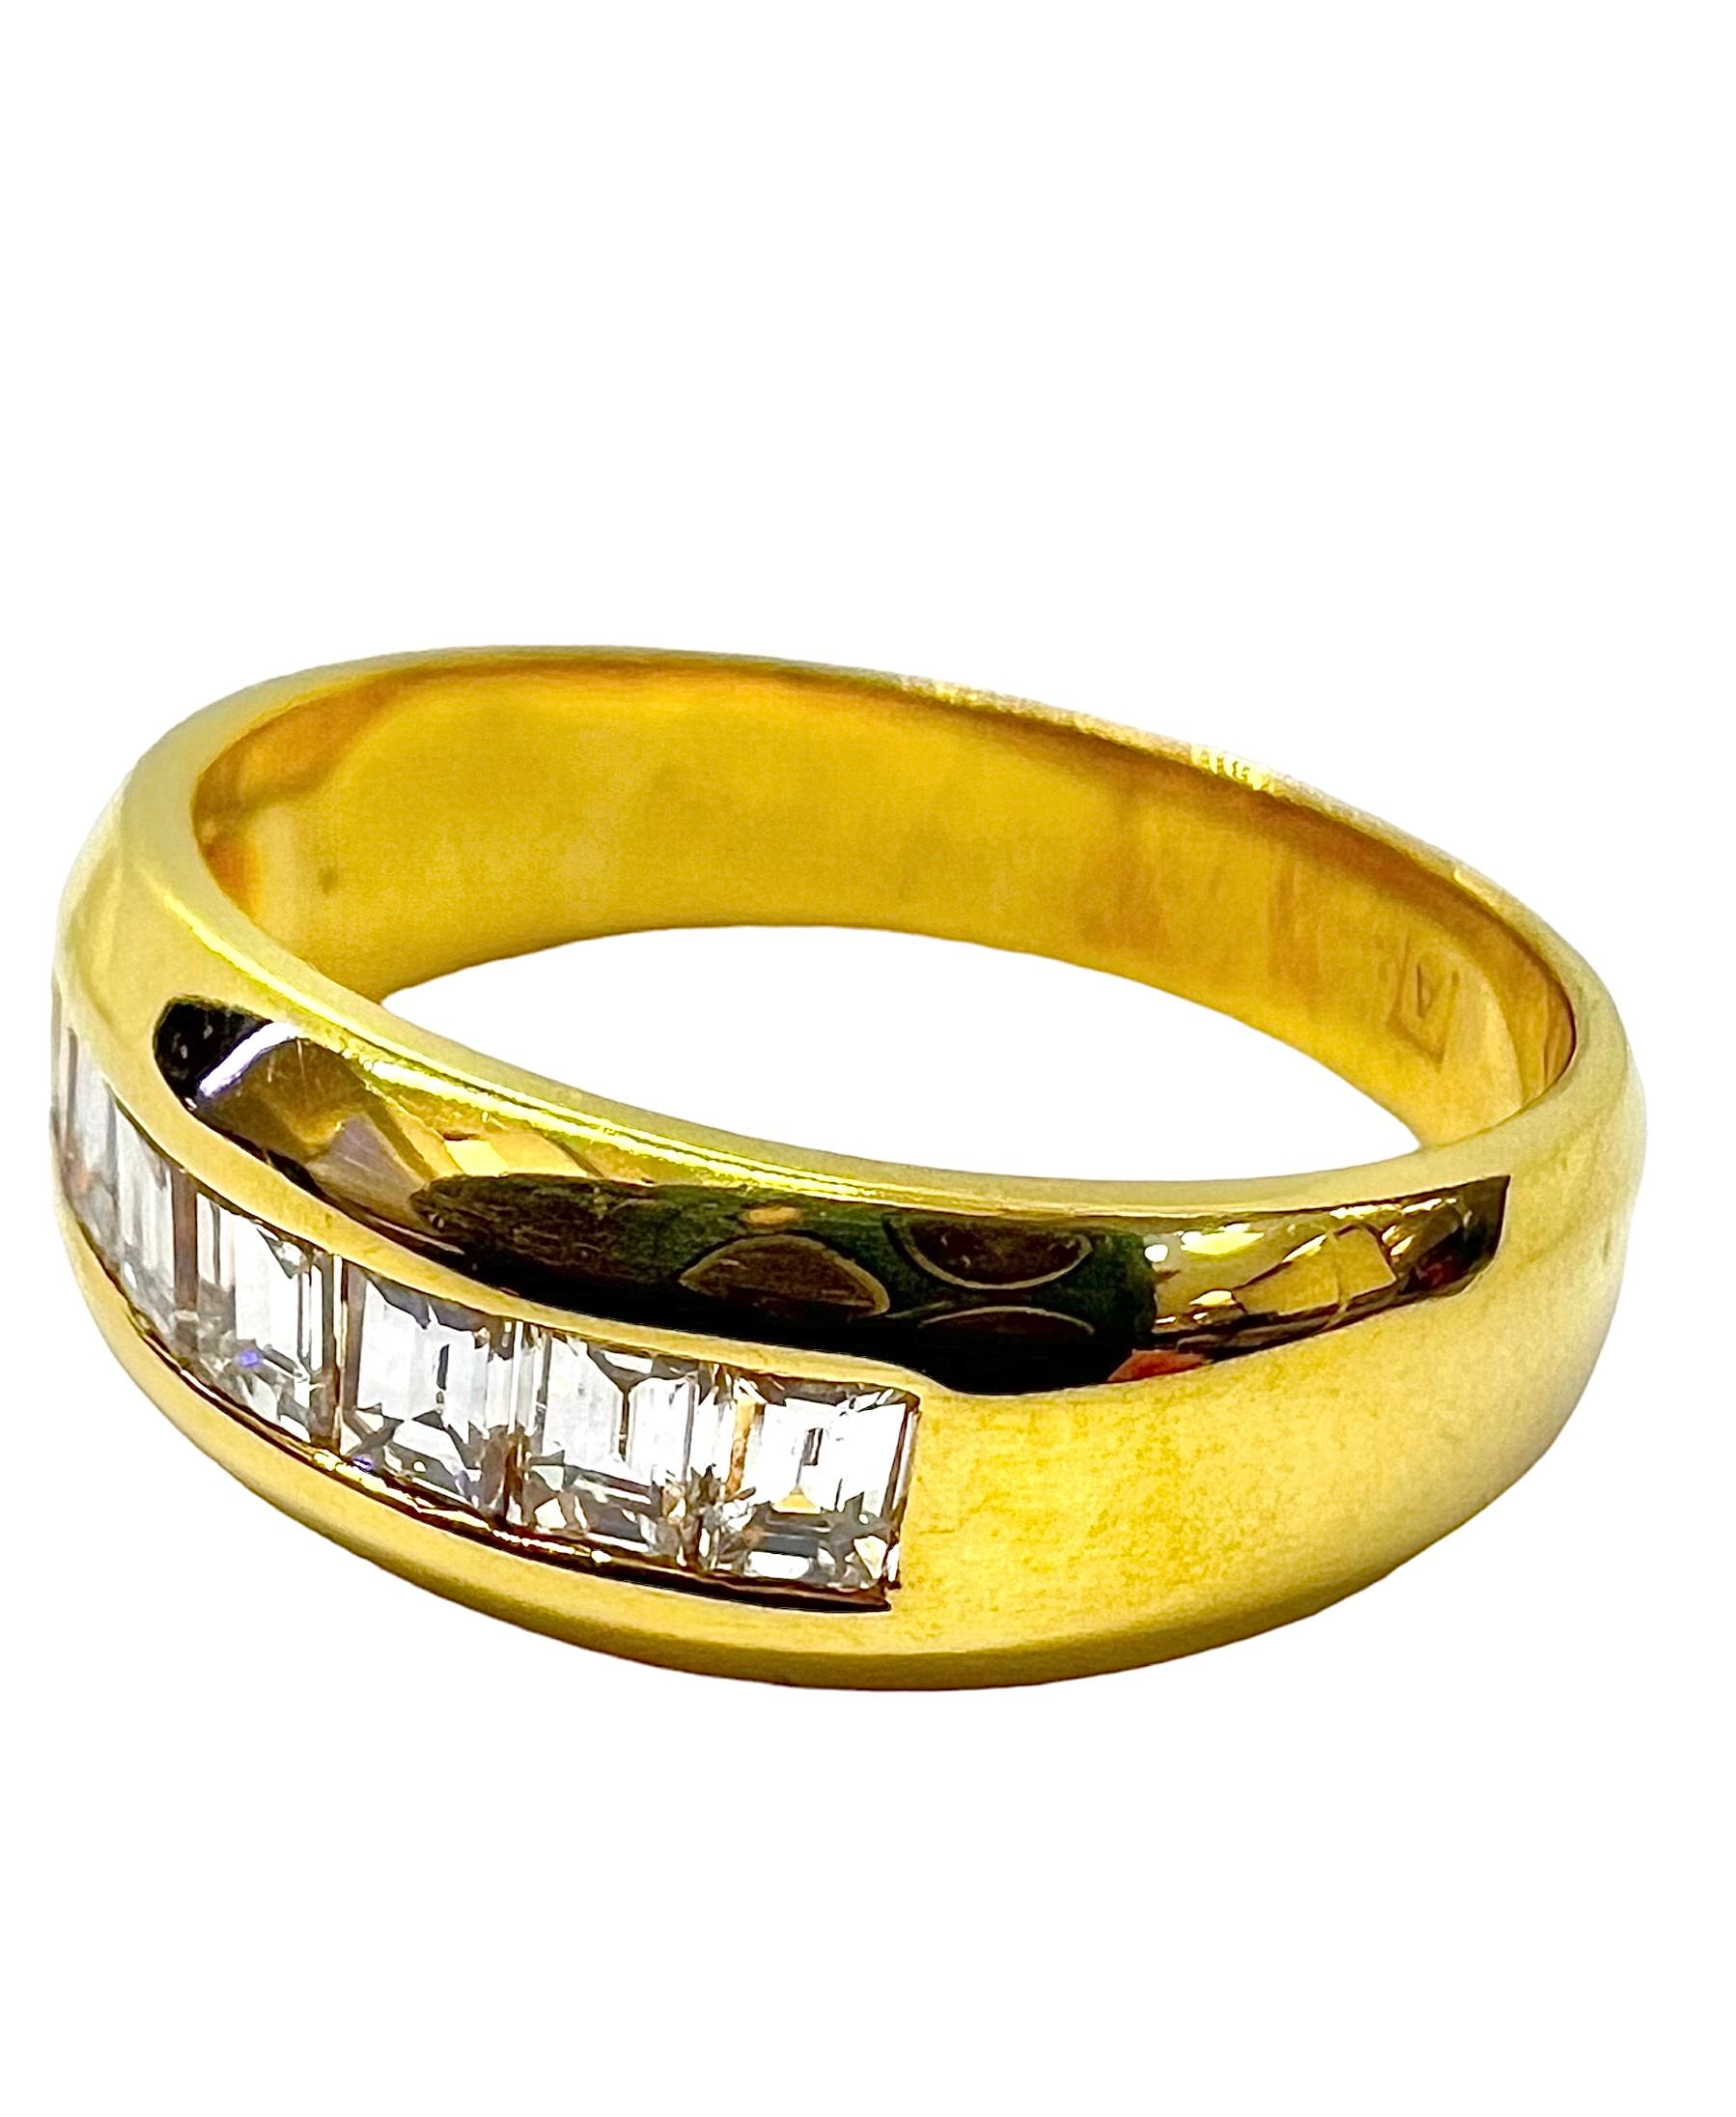 18K yellow gold band with emerald cut diamonds.

Sophia D by Joseph Dardashti LTD has been known worldwide for 35 years and are inspired by classic Art Deco design that merges with modern manufacturing techniques.  